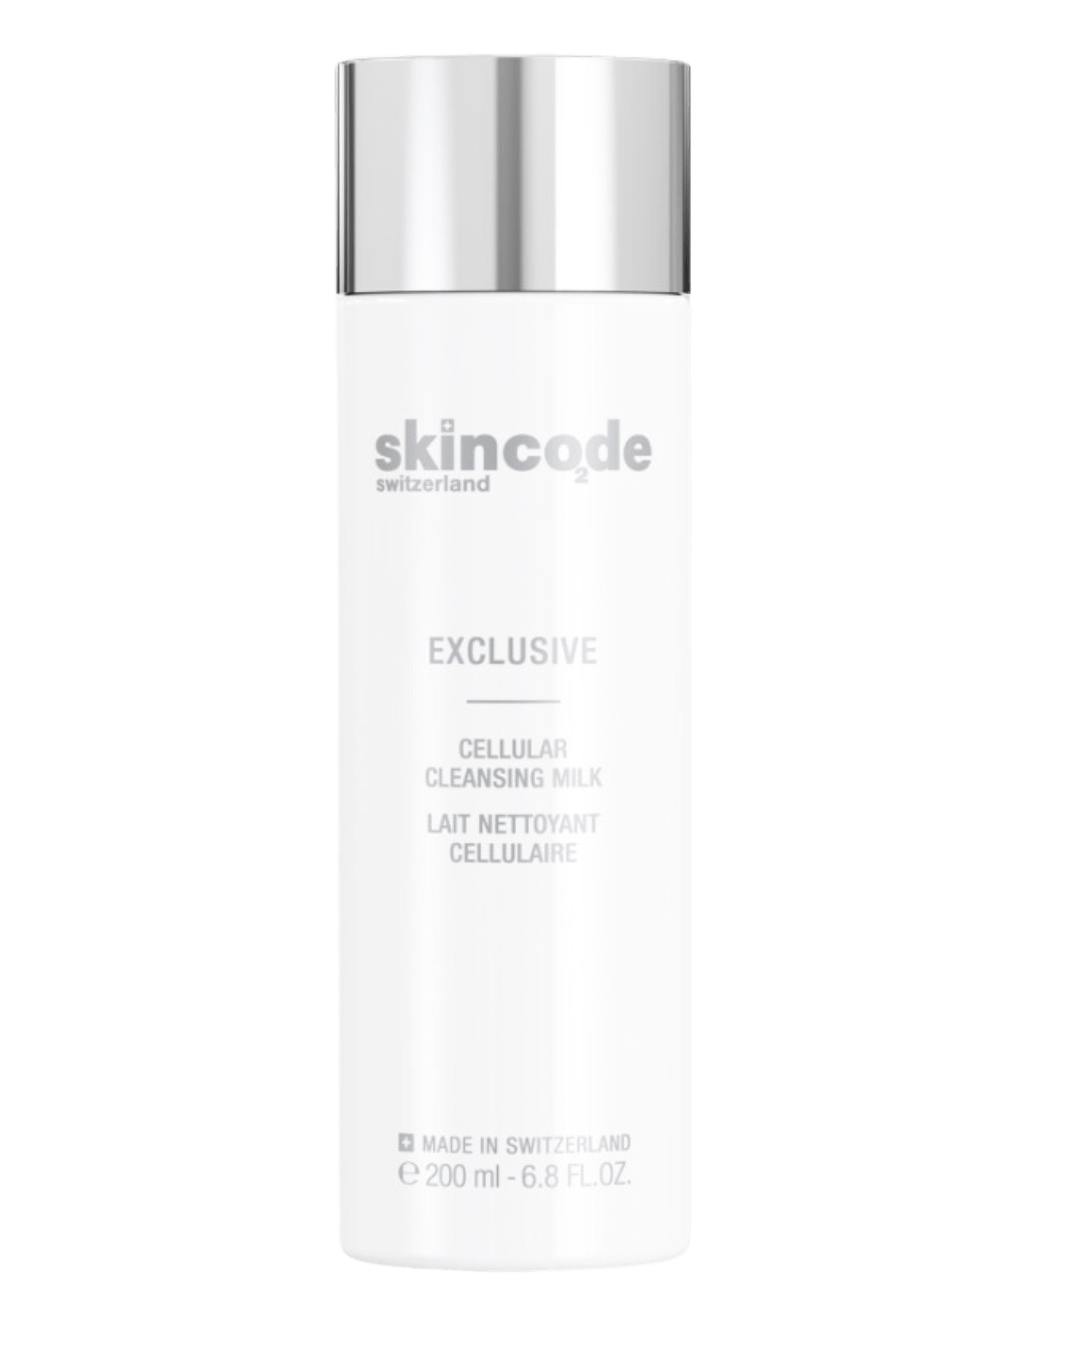 Daily Vanity Beauty Awards 2024 Best Skincare SKINCODE Cellular Cleansing Milk Voted By Beauty Experts